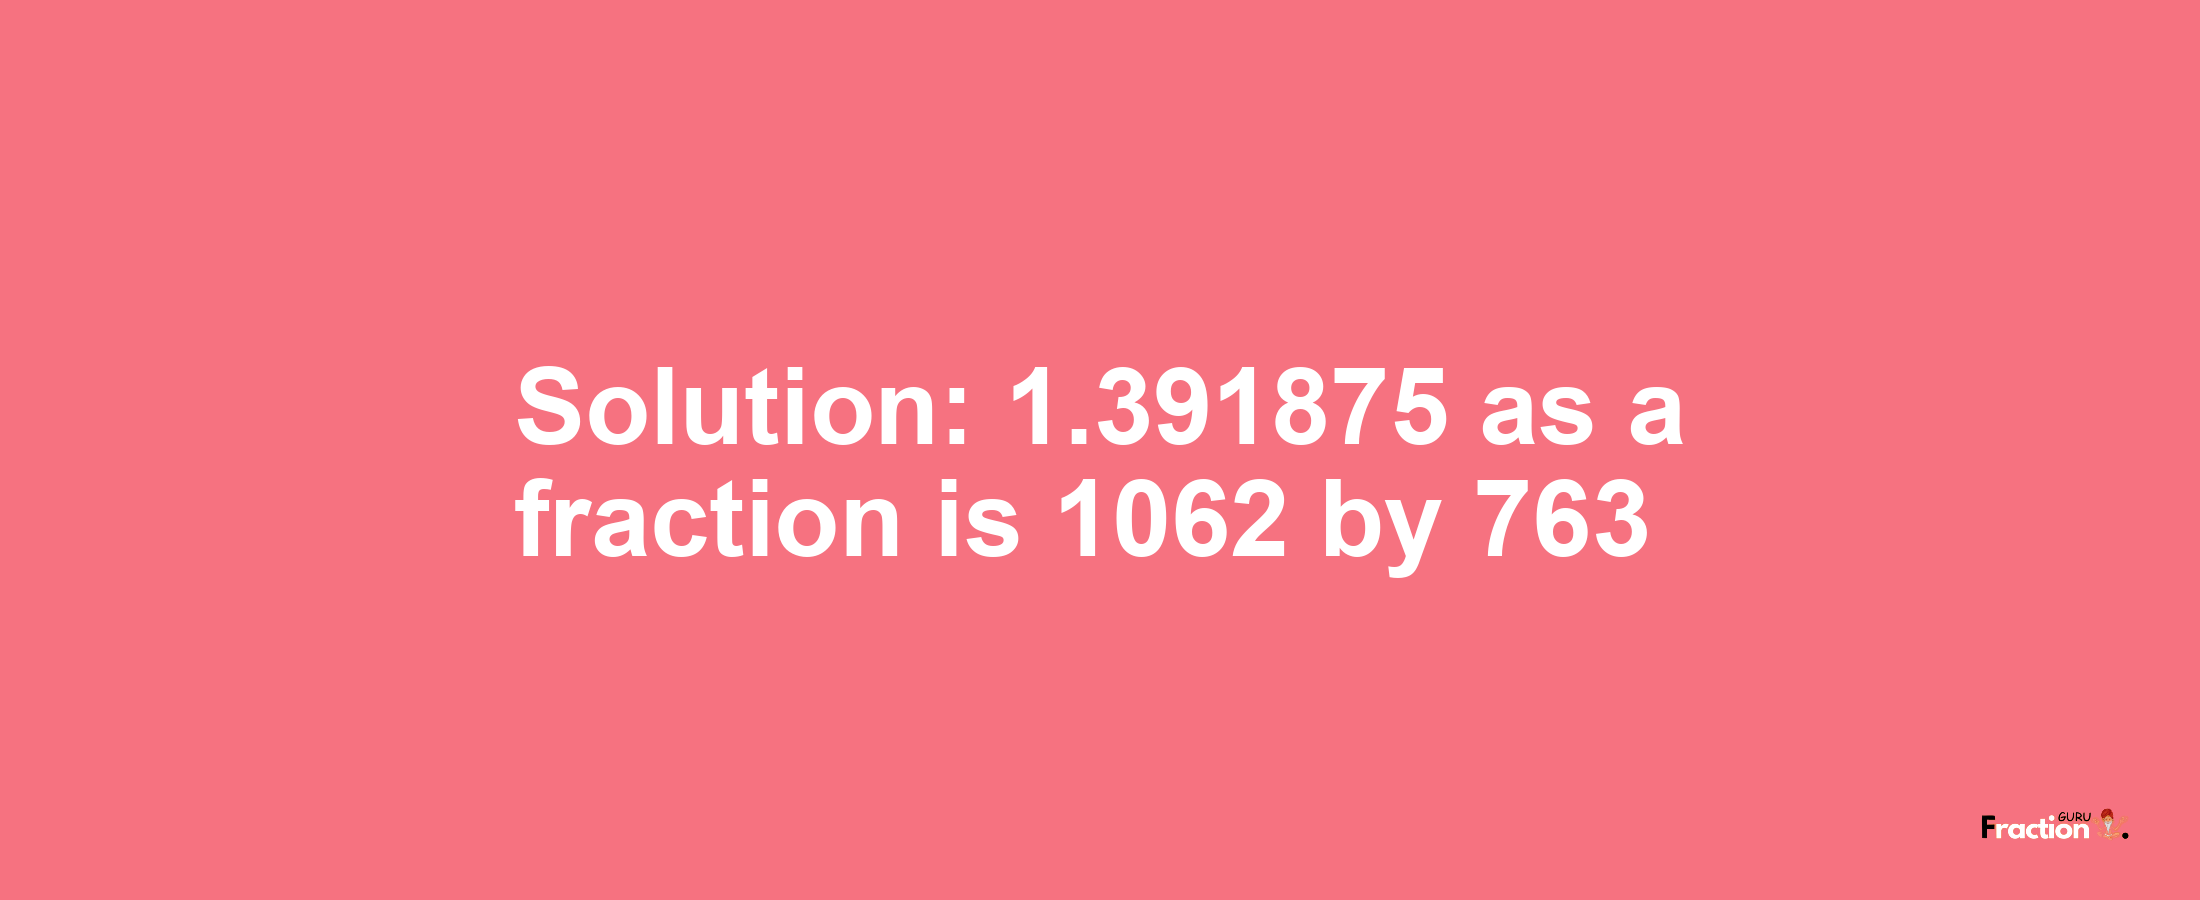 Solution:1.391875 as a fraction is 1062/763